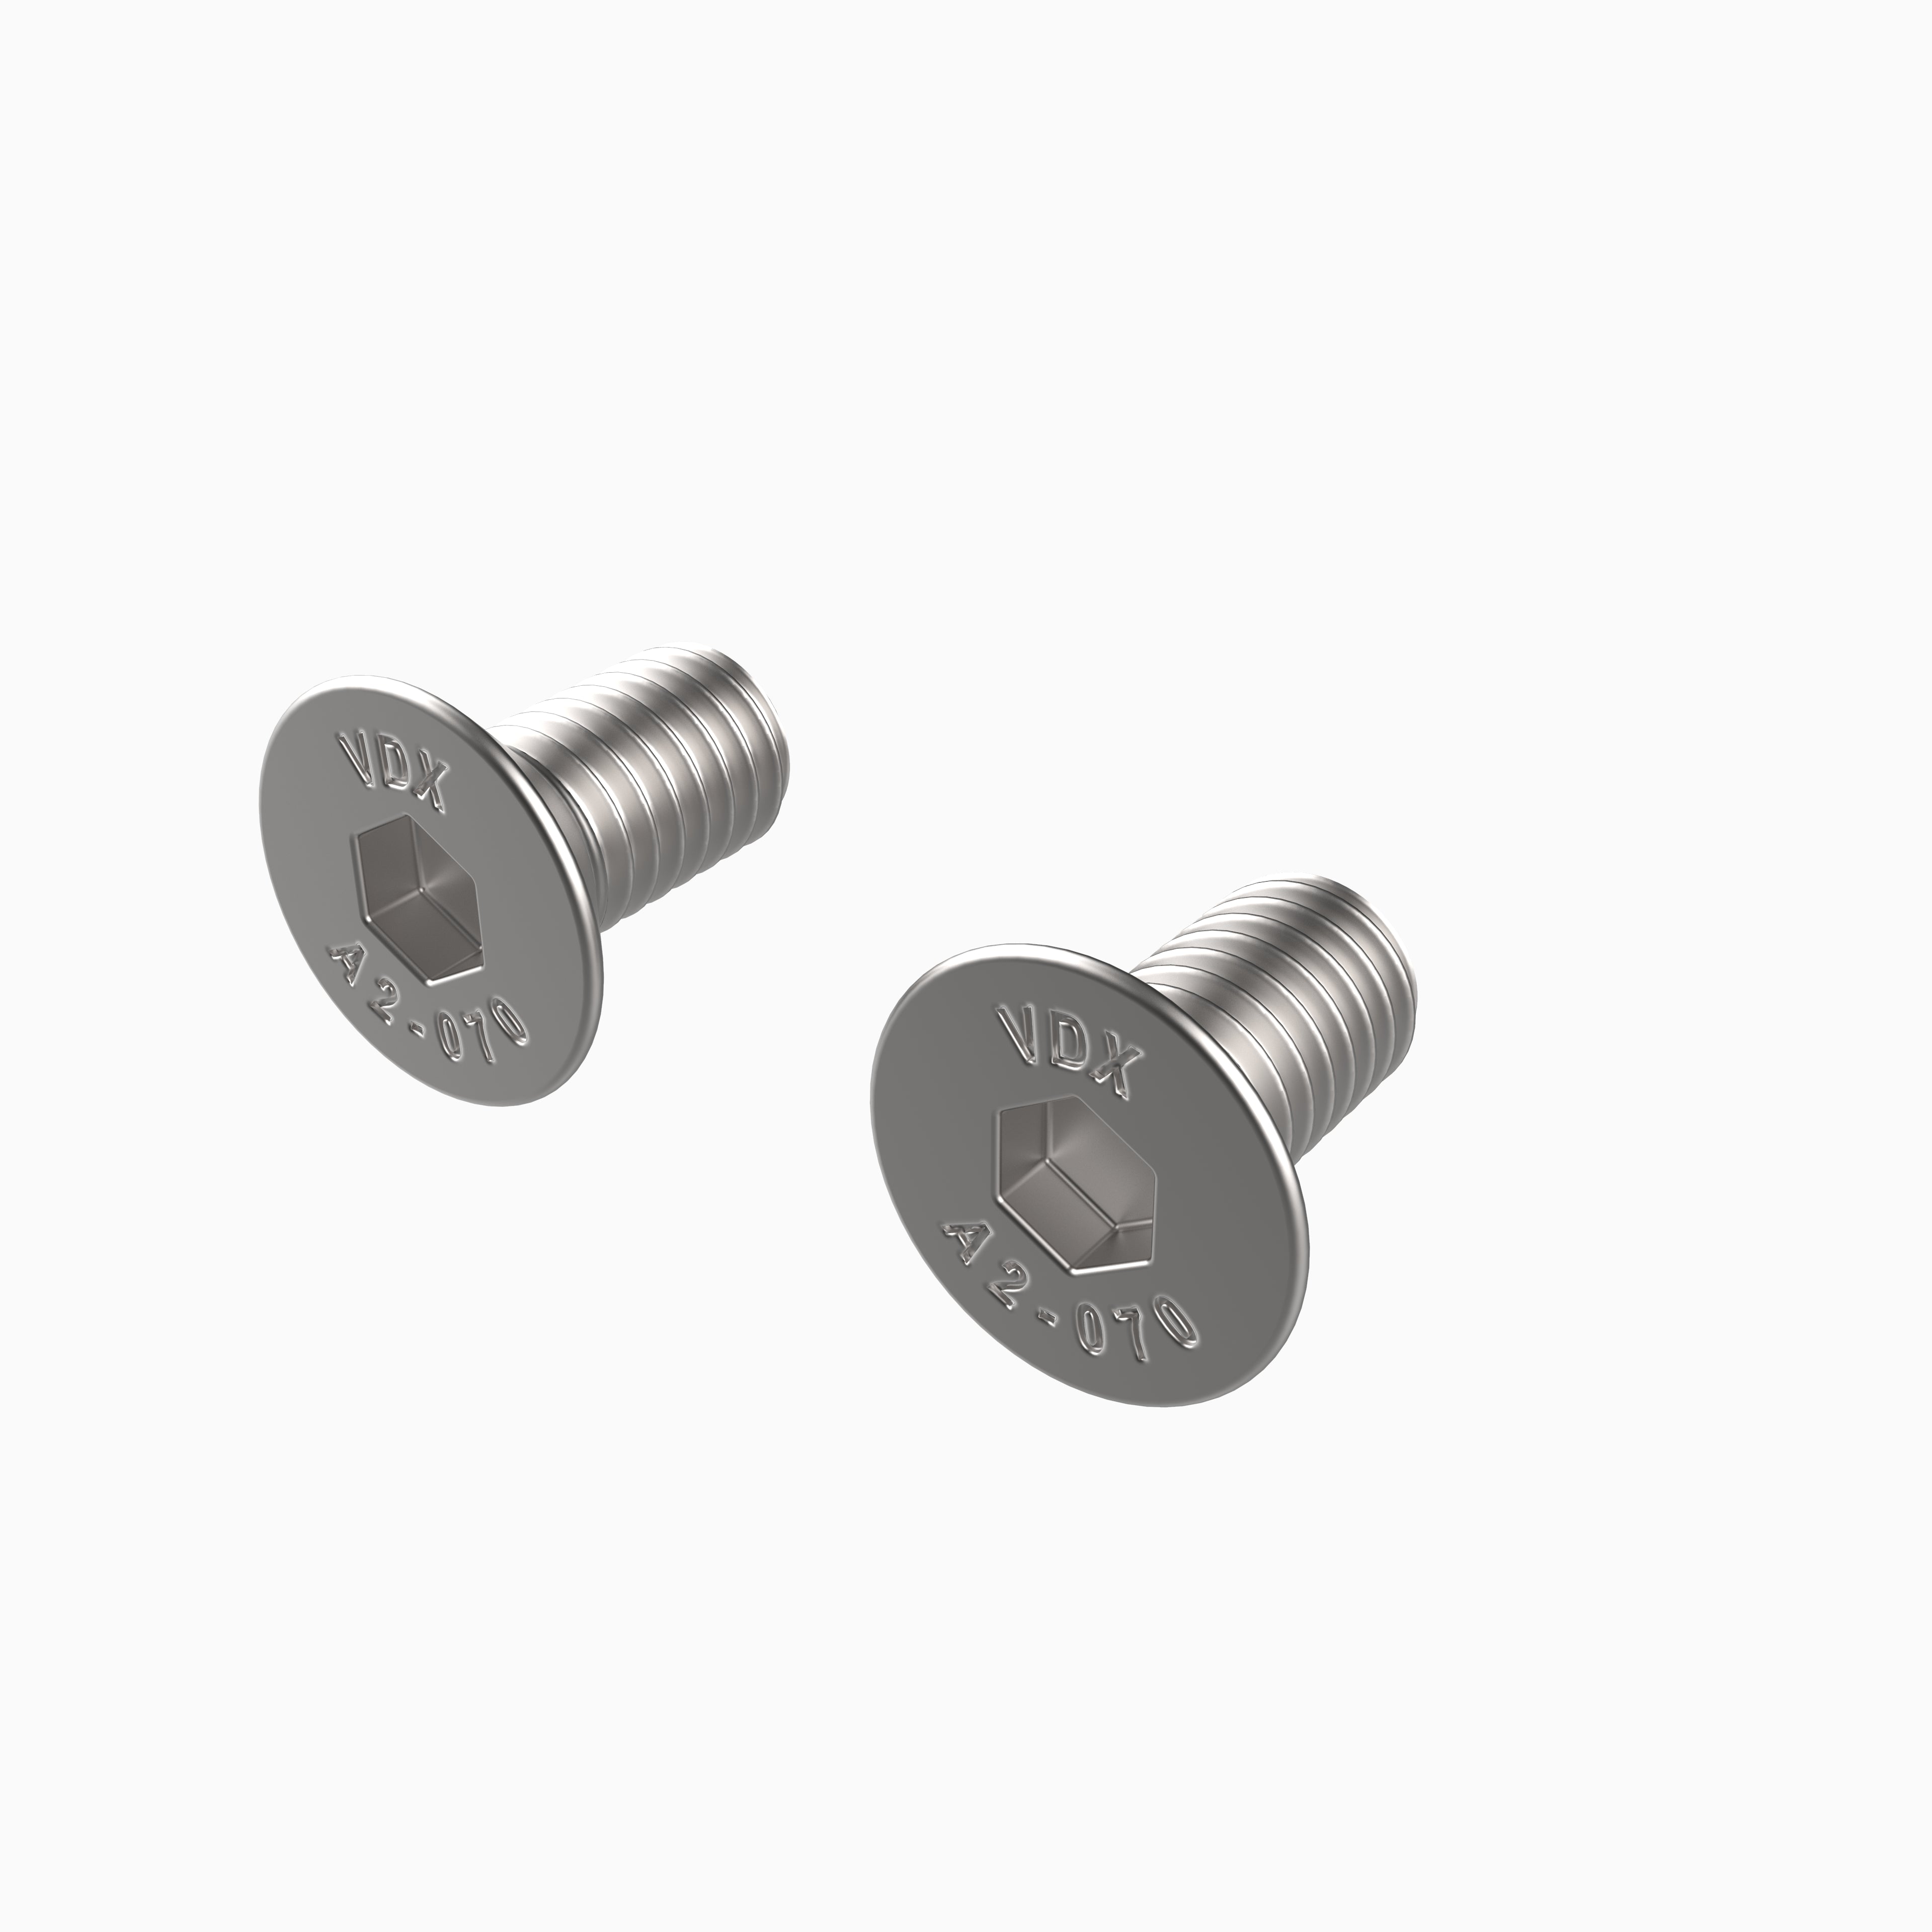 M6 Bolts (2 Pack)